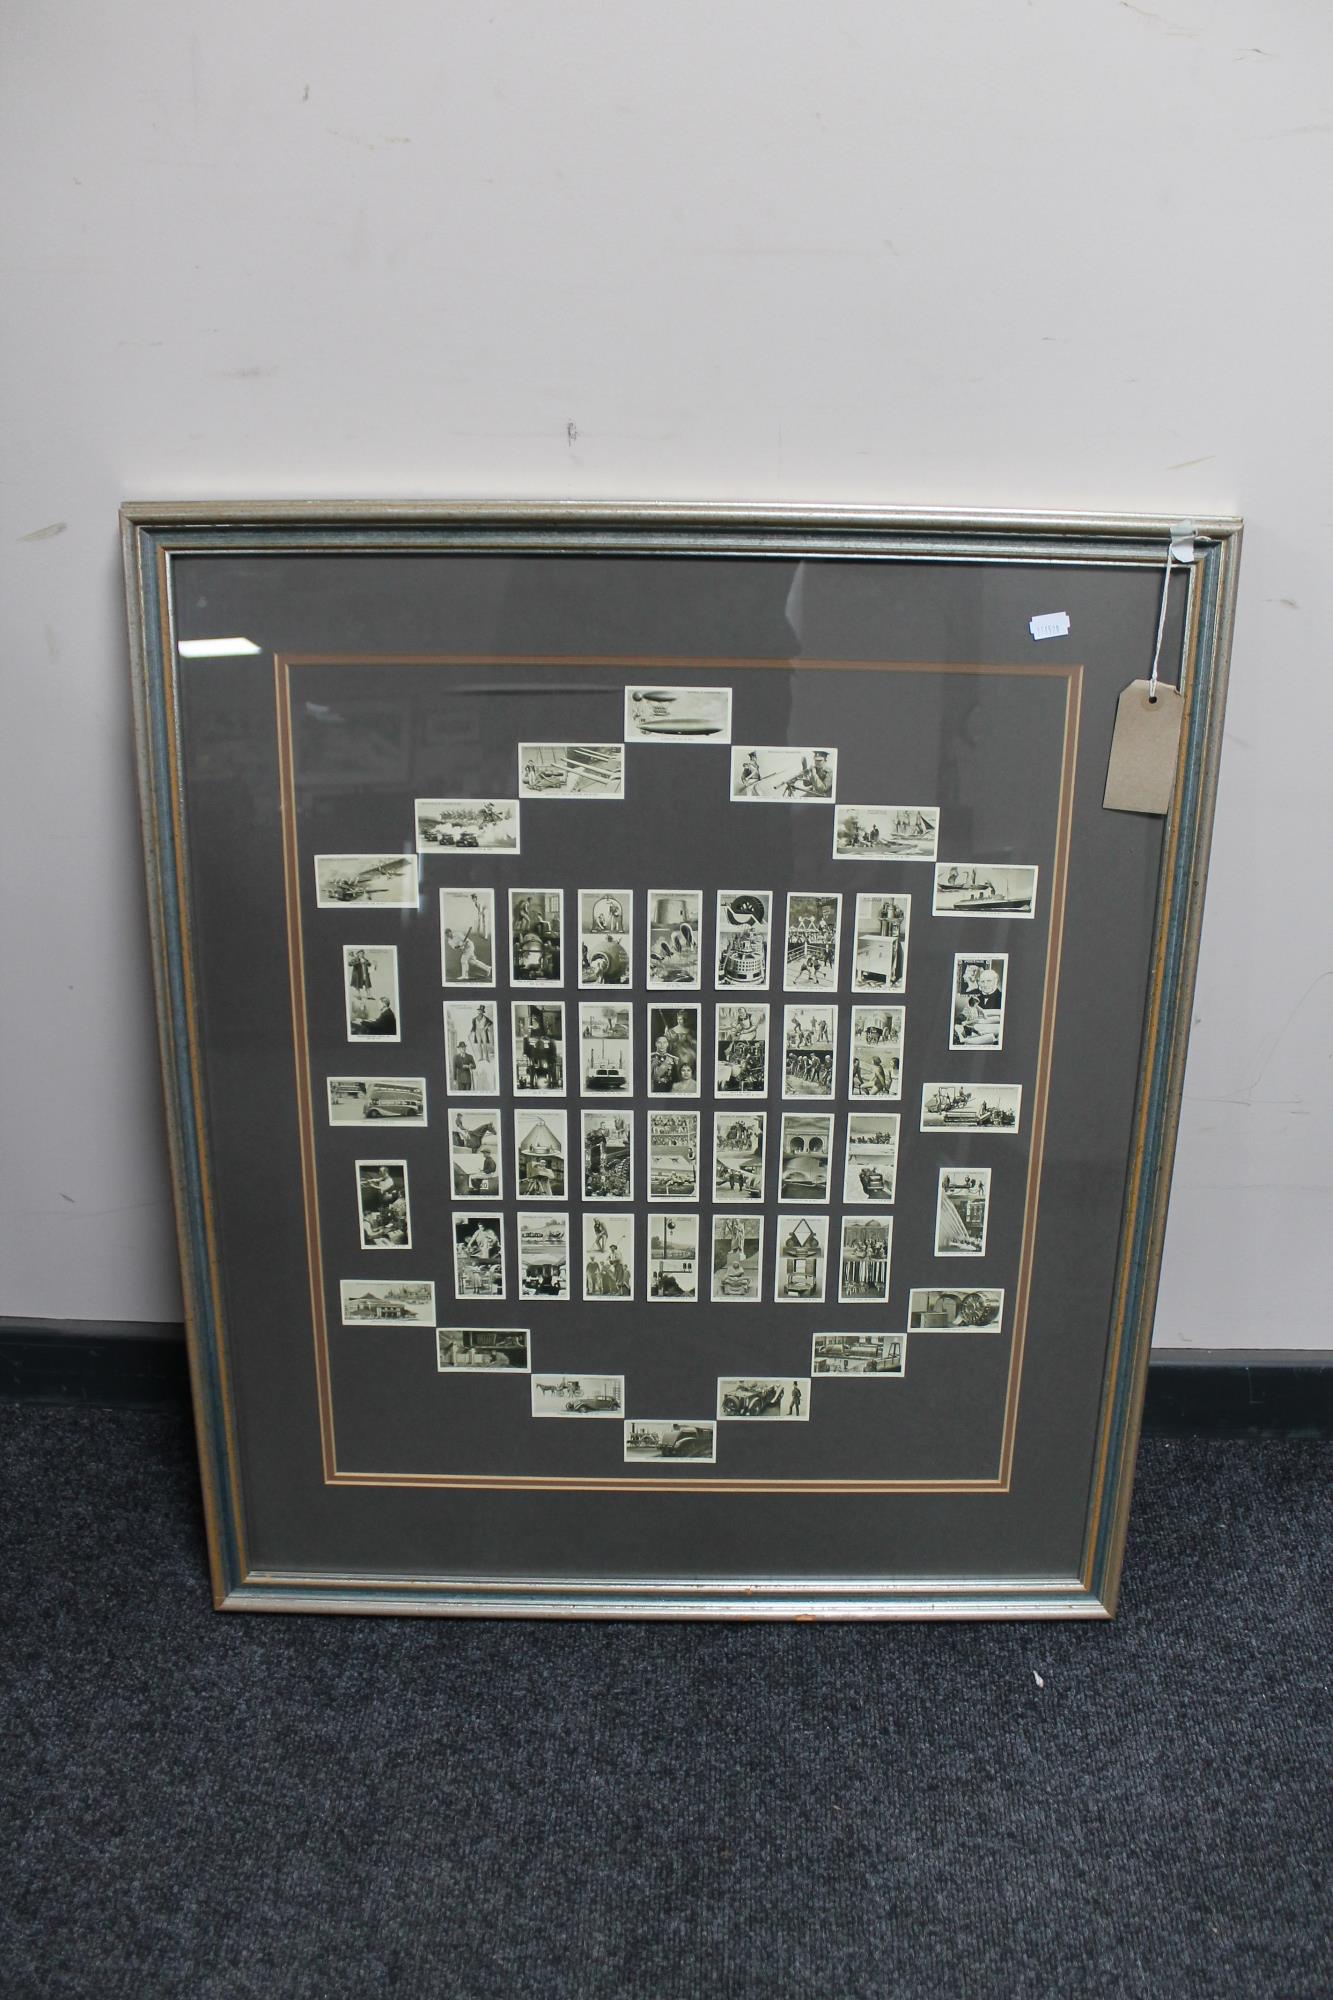 A framed set of Mitchell's cigarette cards, Events from 1837 to 1937.